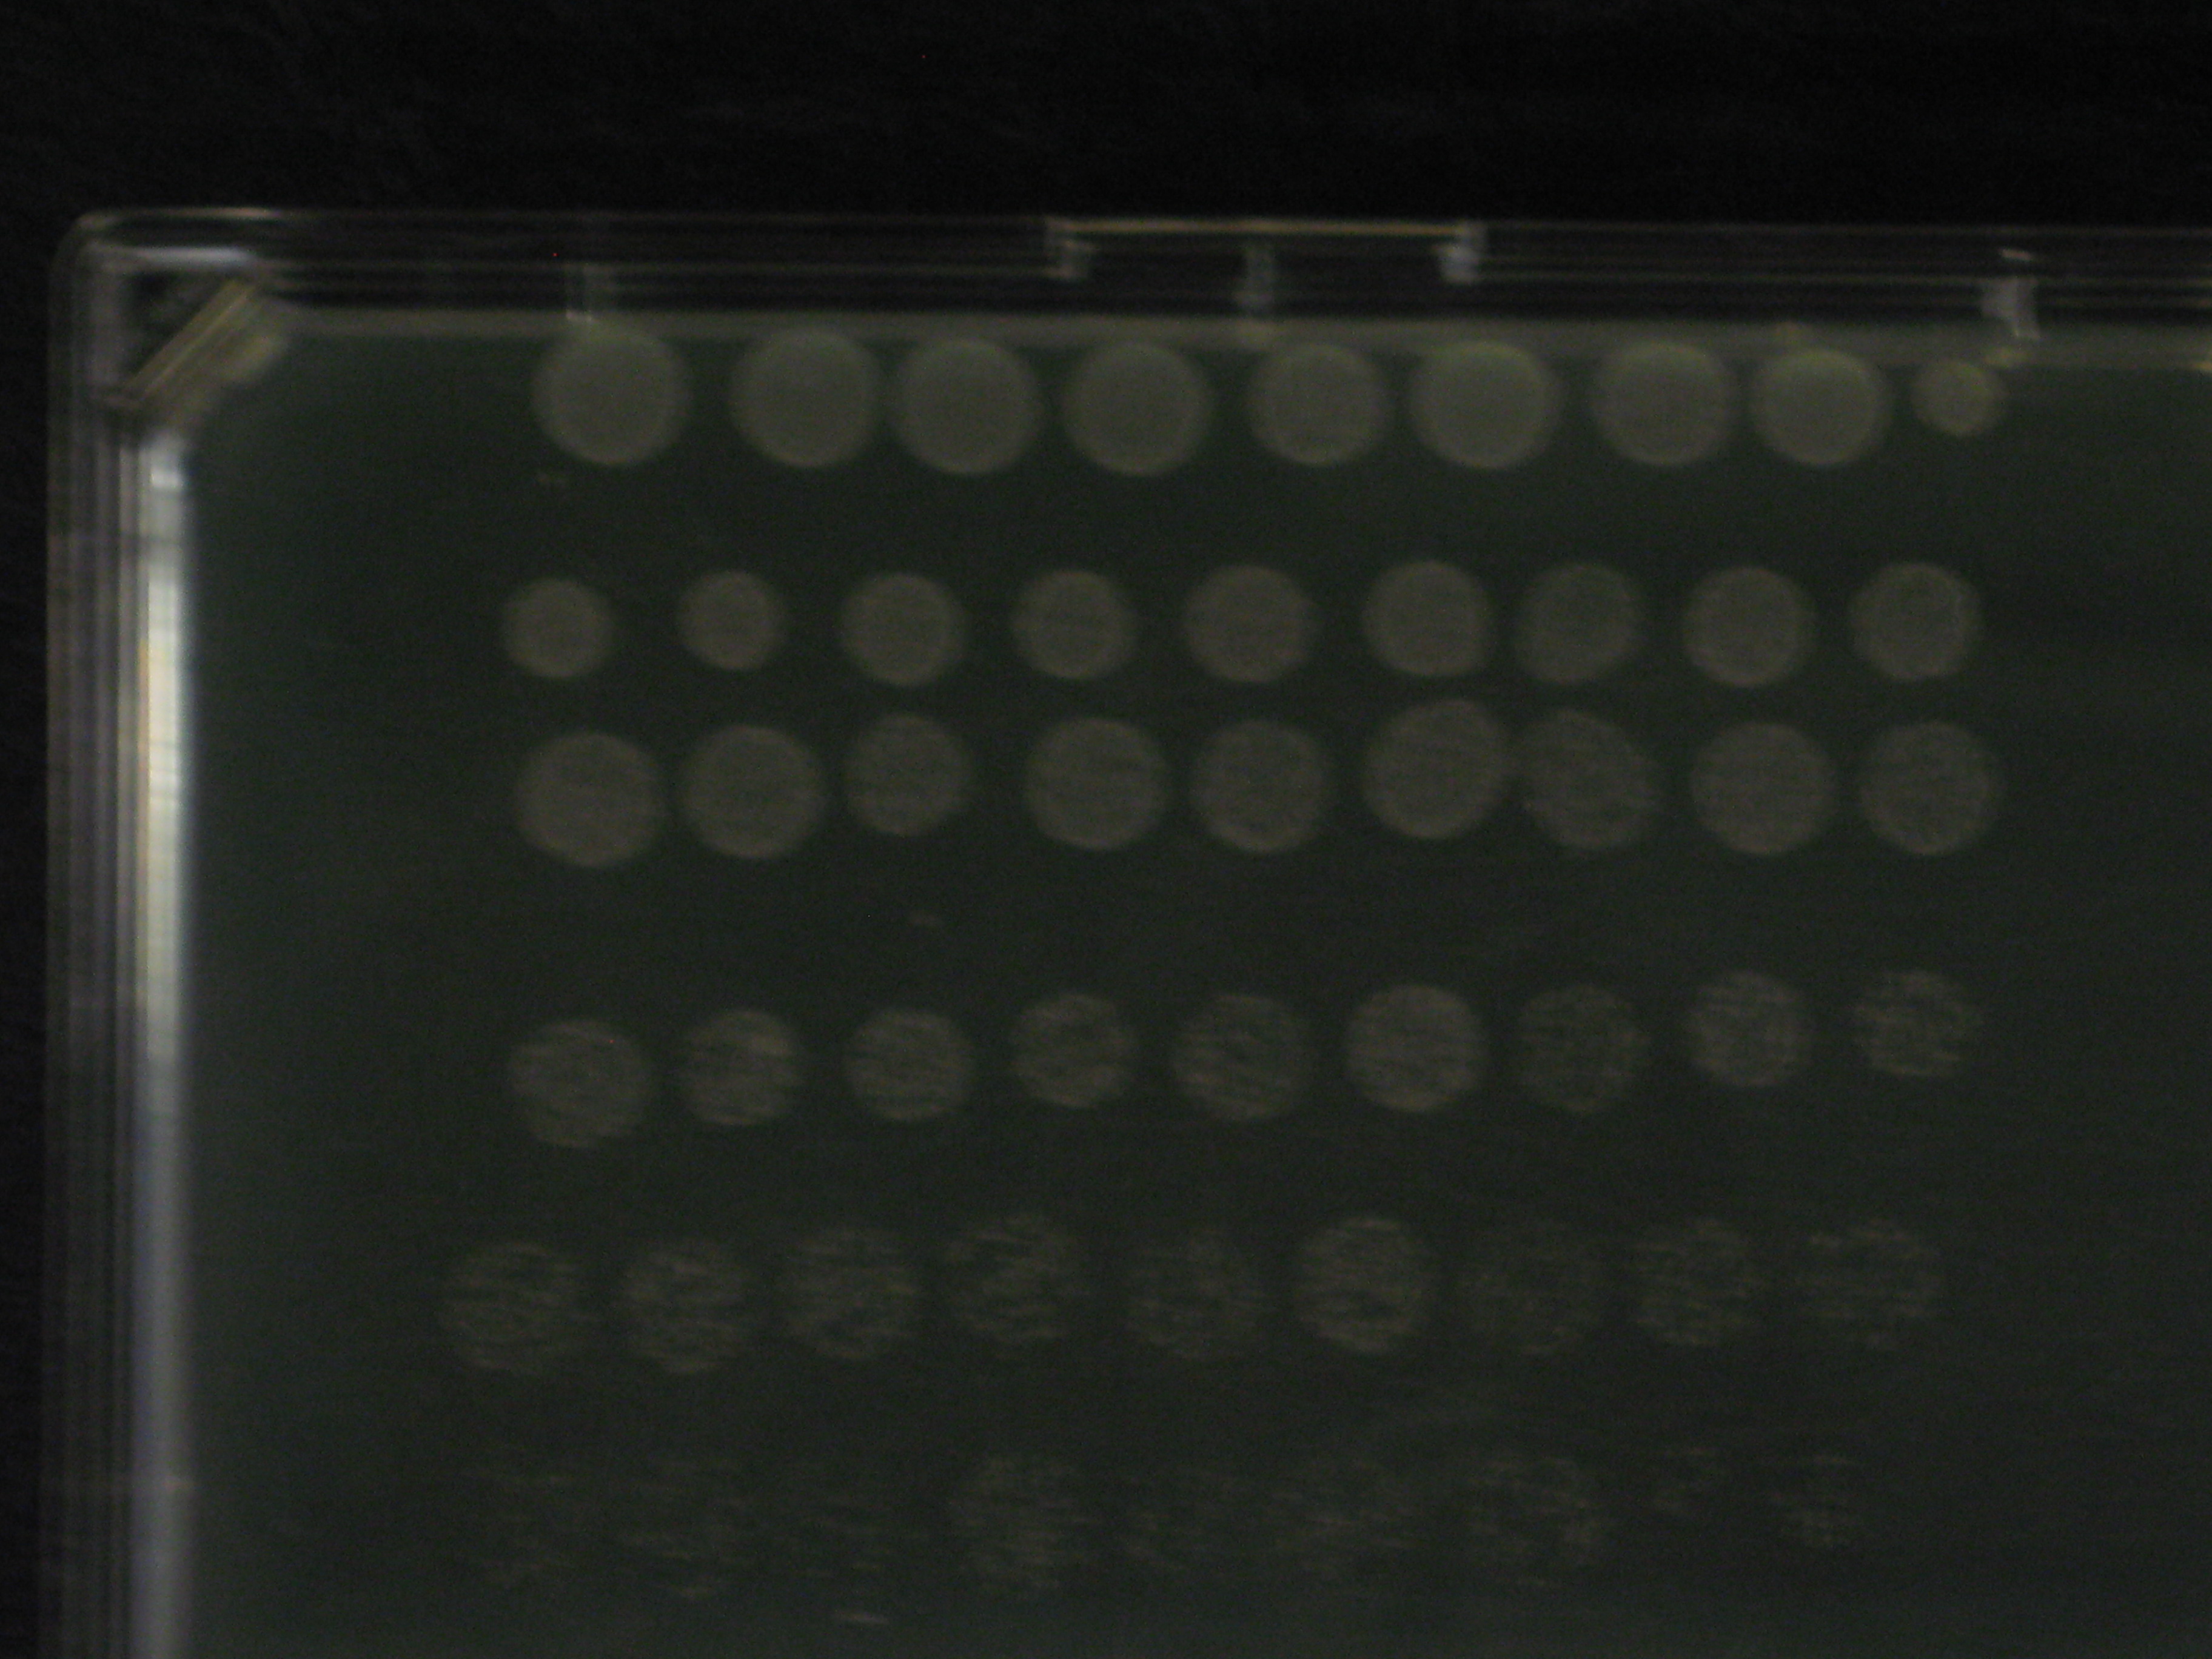 Binding assay without HA